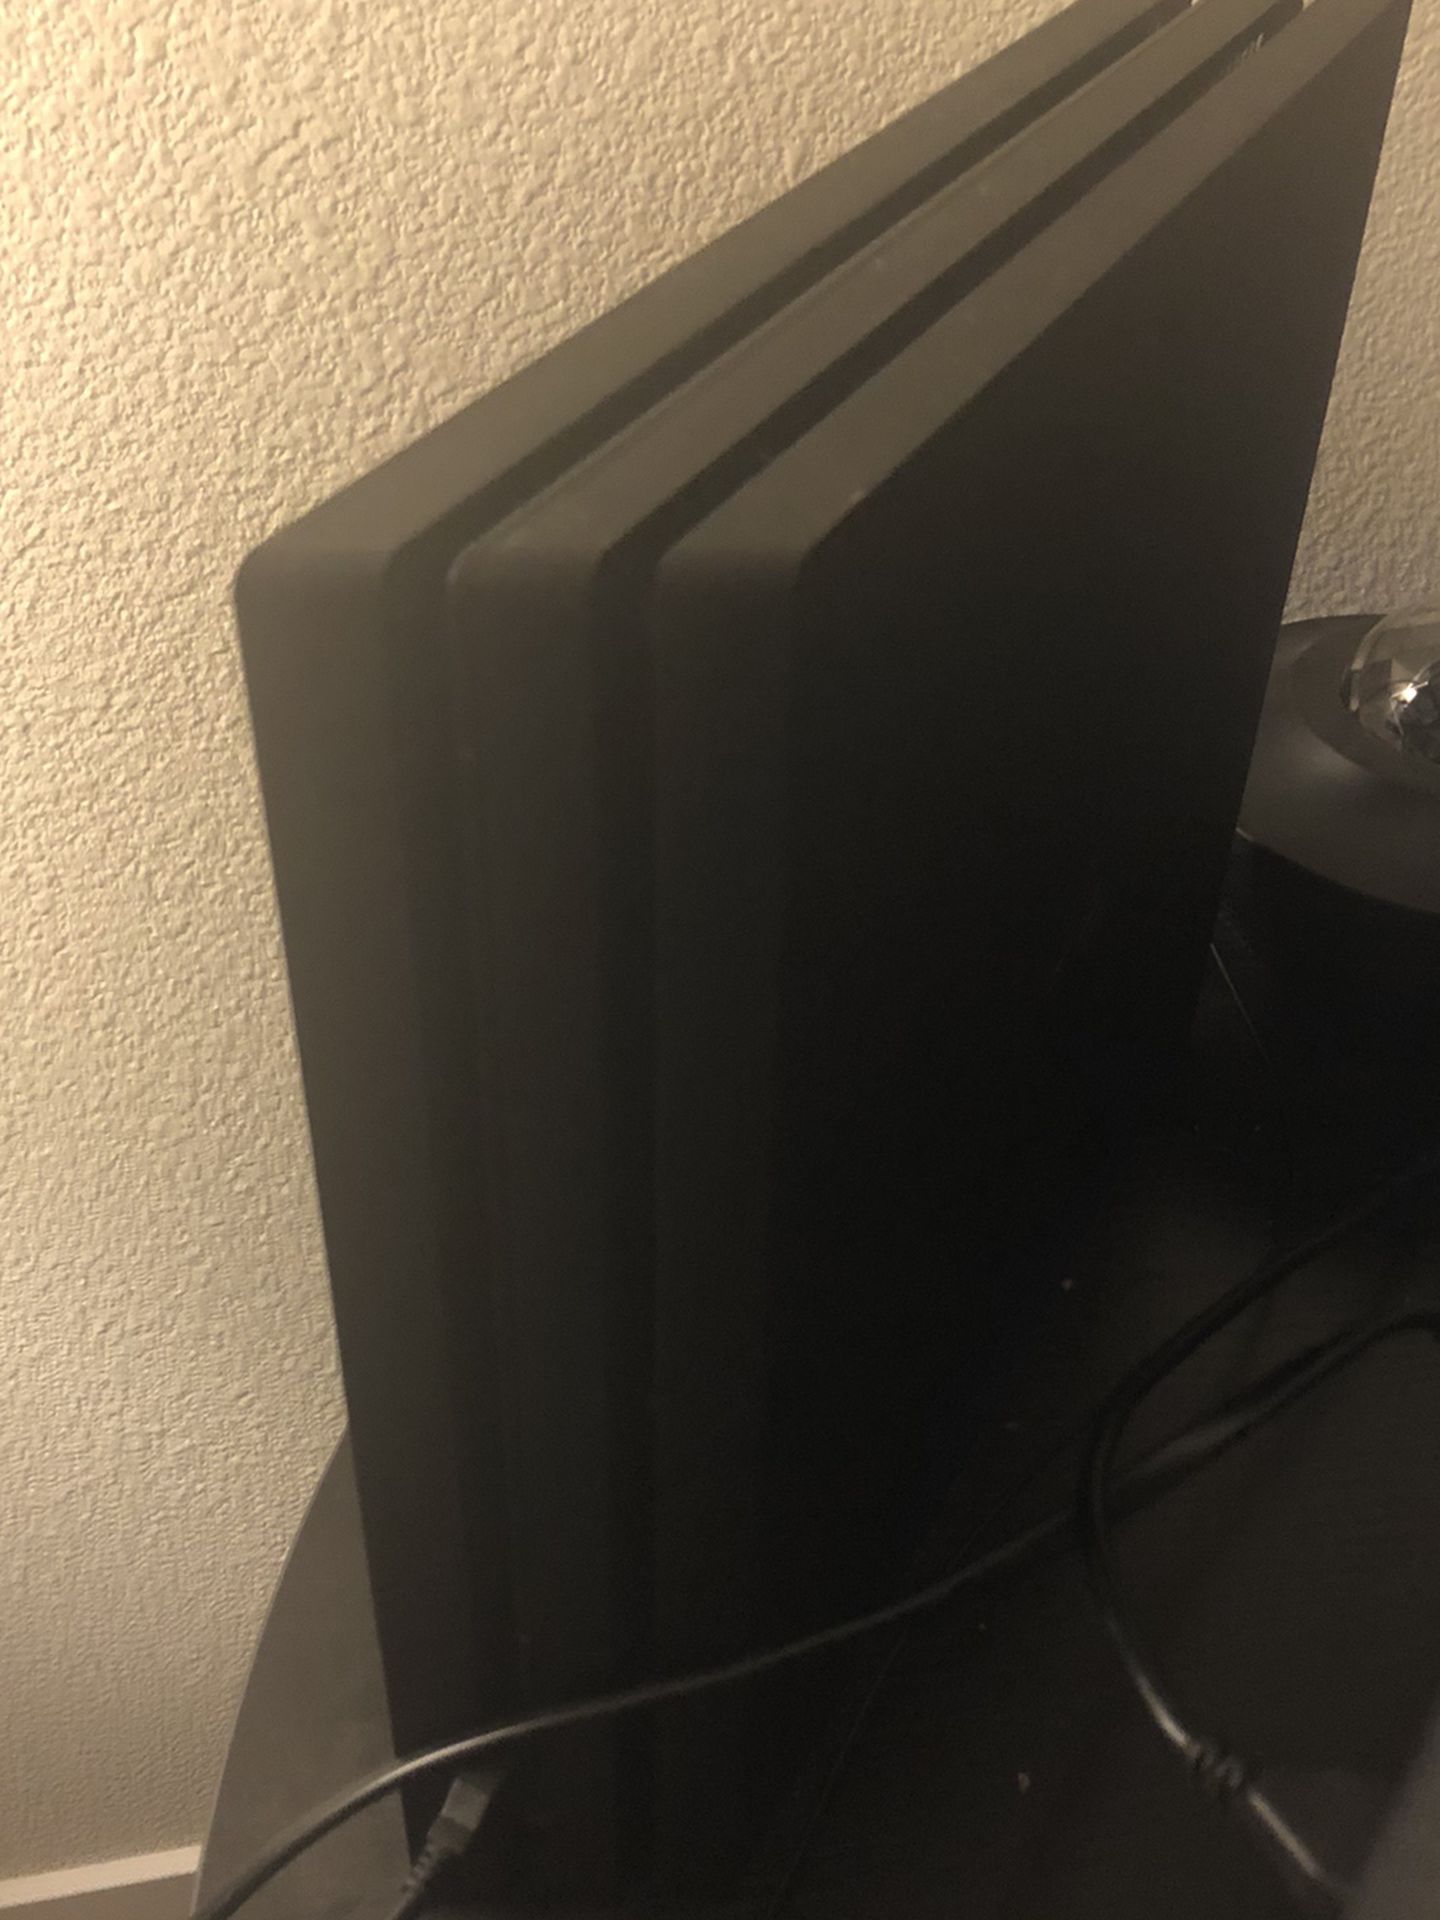 PS4 Pro 1 TB Good Condition with Controller And Several Games